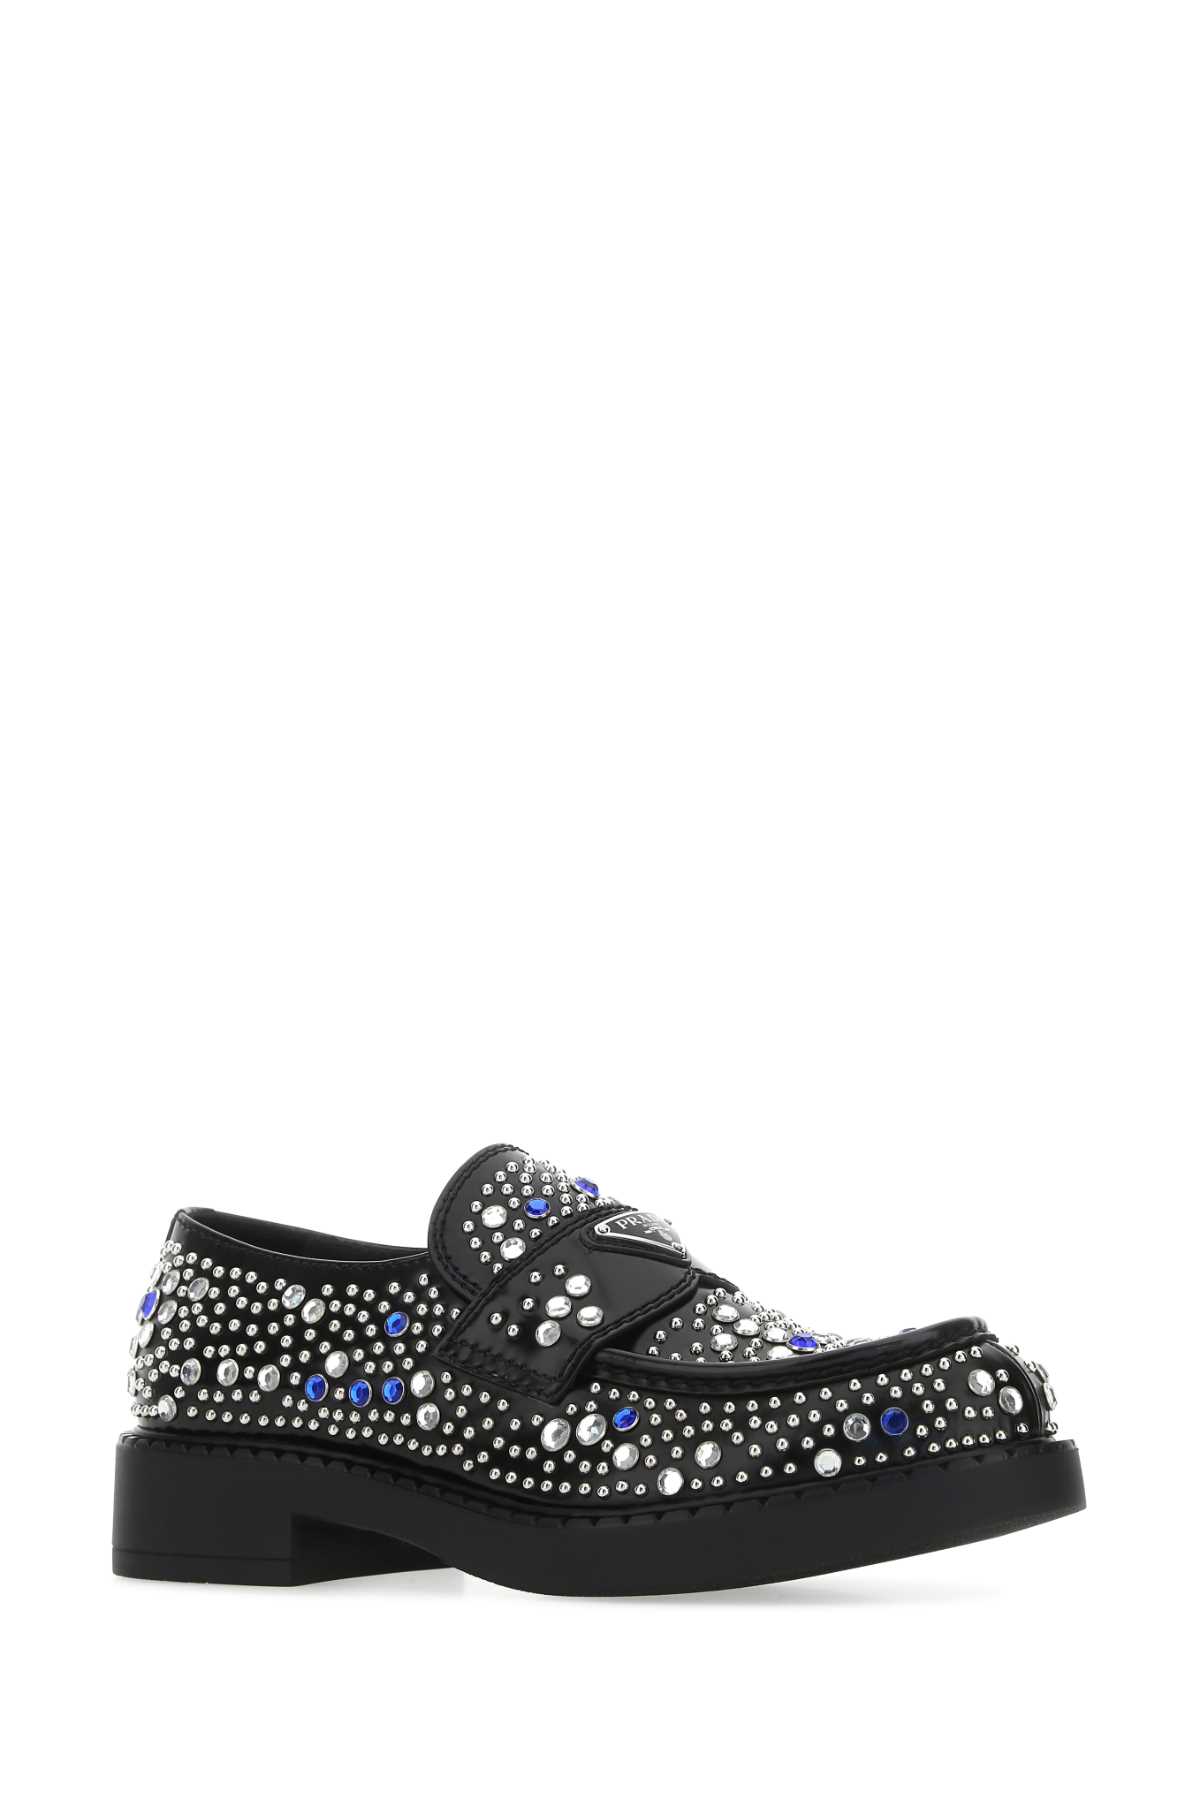 Prada Embellished Leather Loafers In Multicolor